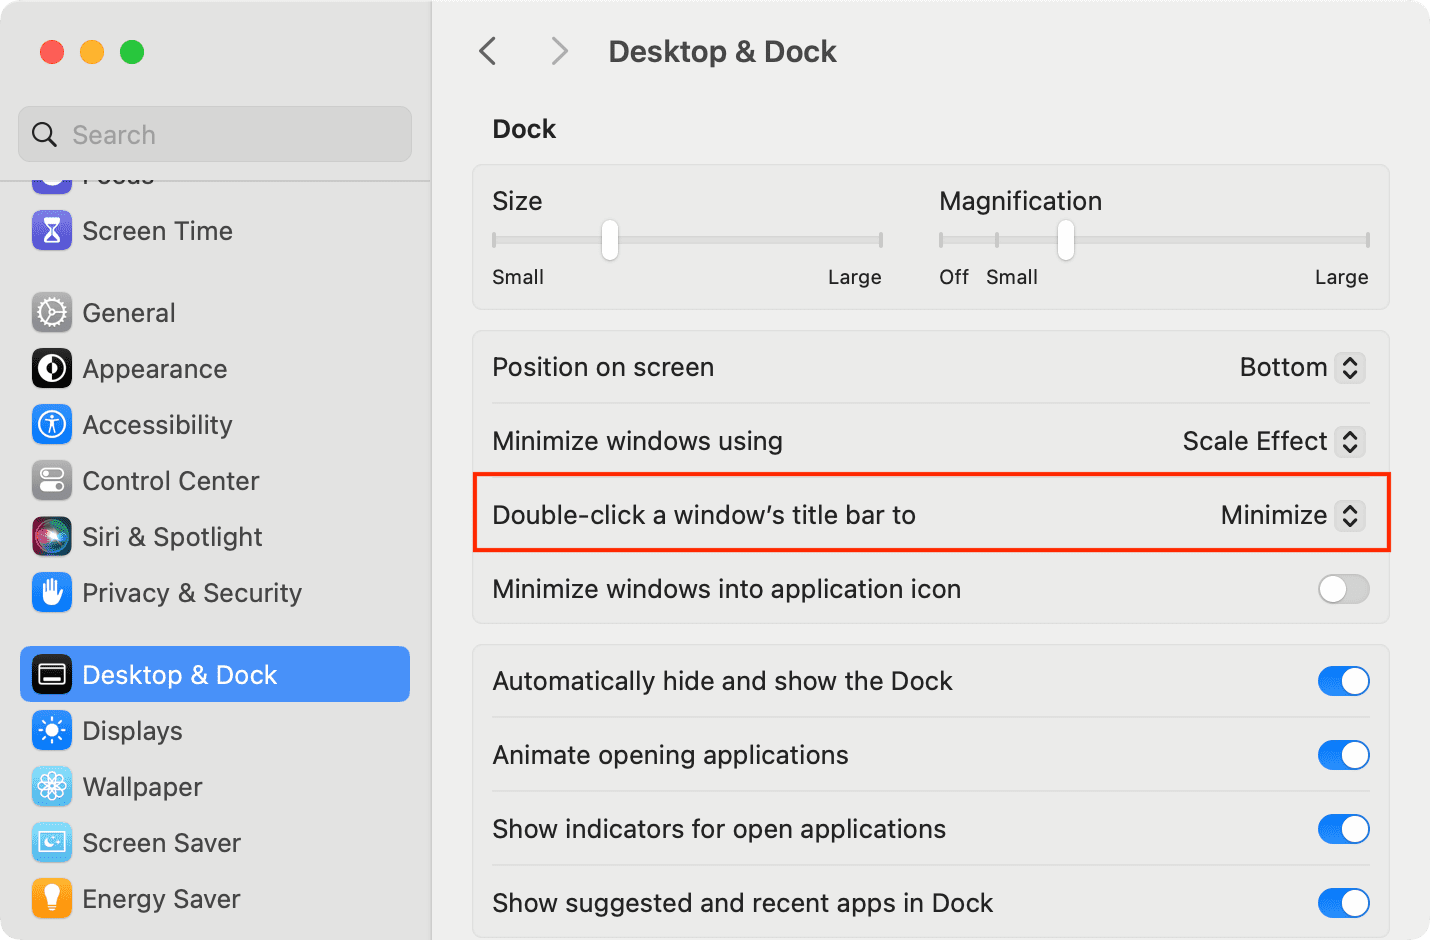 Double-click a window's title bar to Minimize on Mac